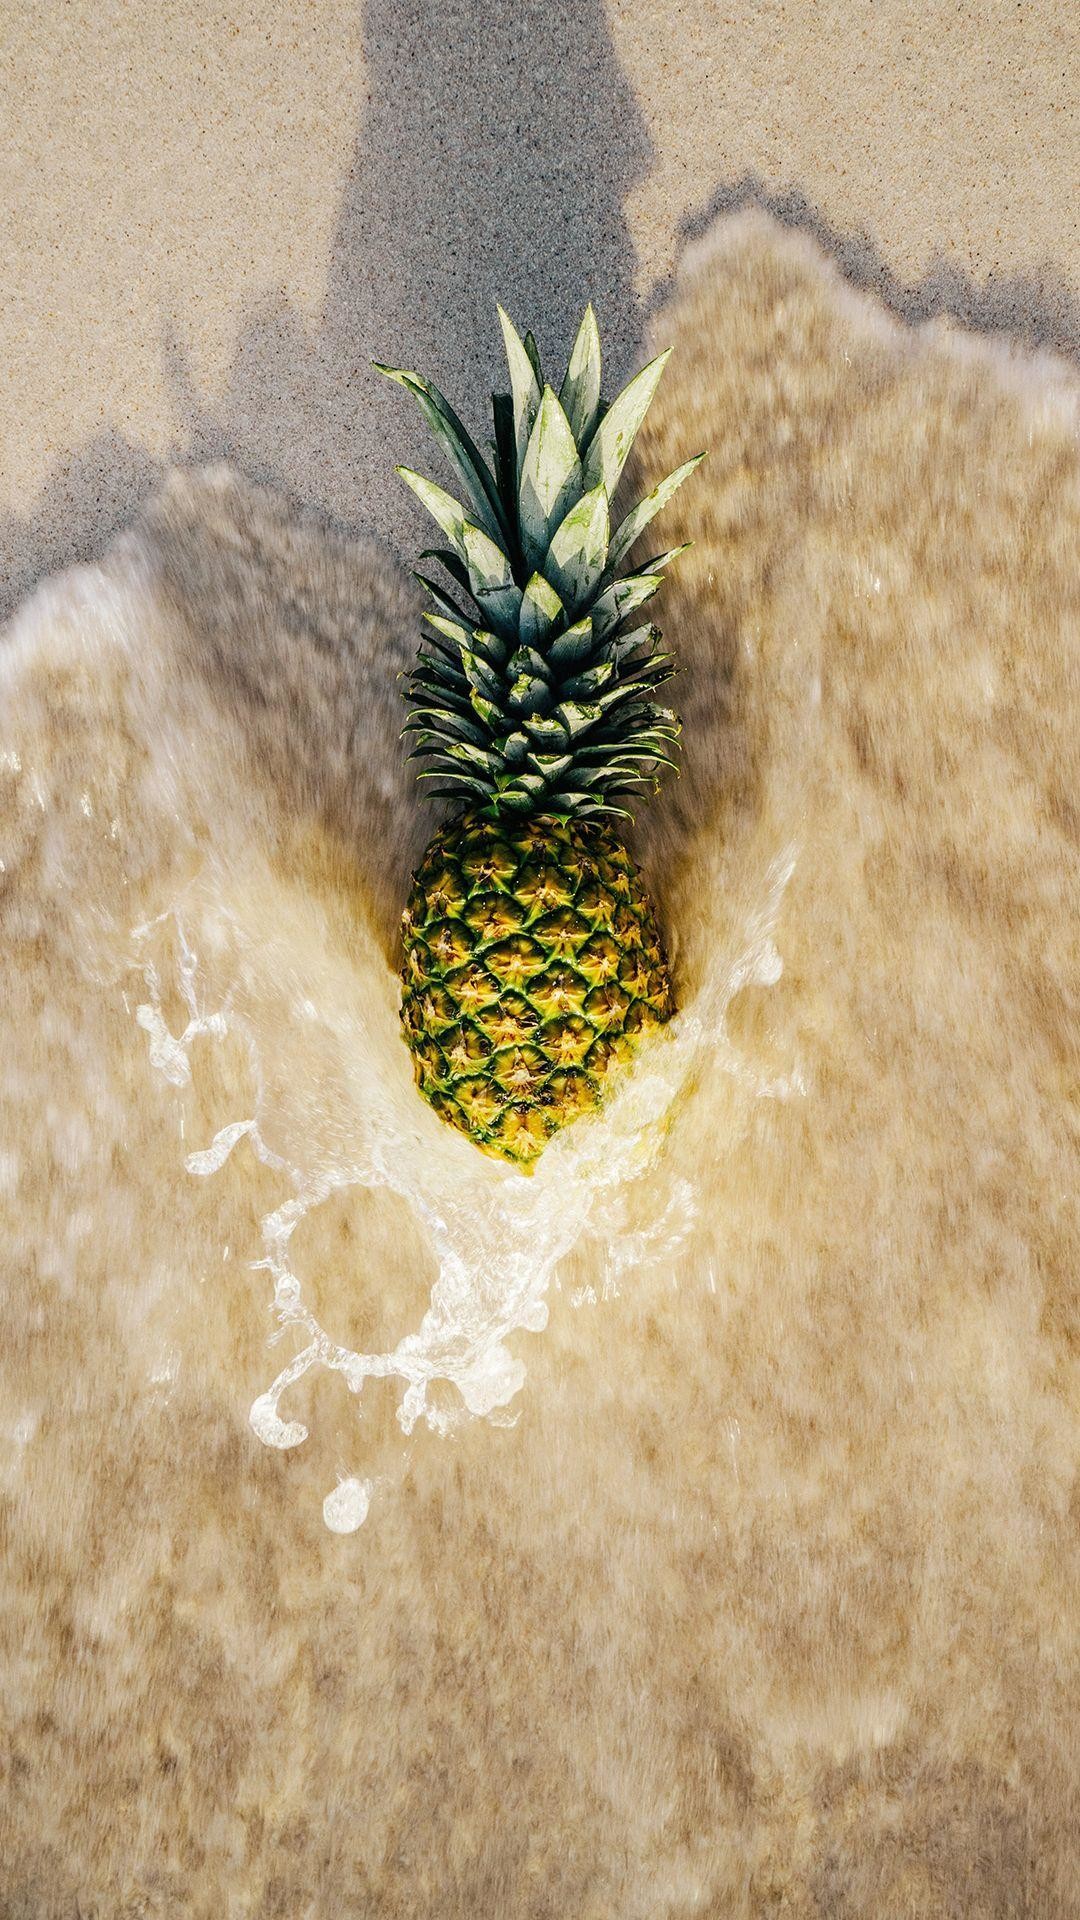 1080x1920 5 Cool Pineapple Backgrounds for iPhones - Pineapple Supply Co.